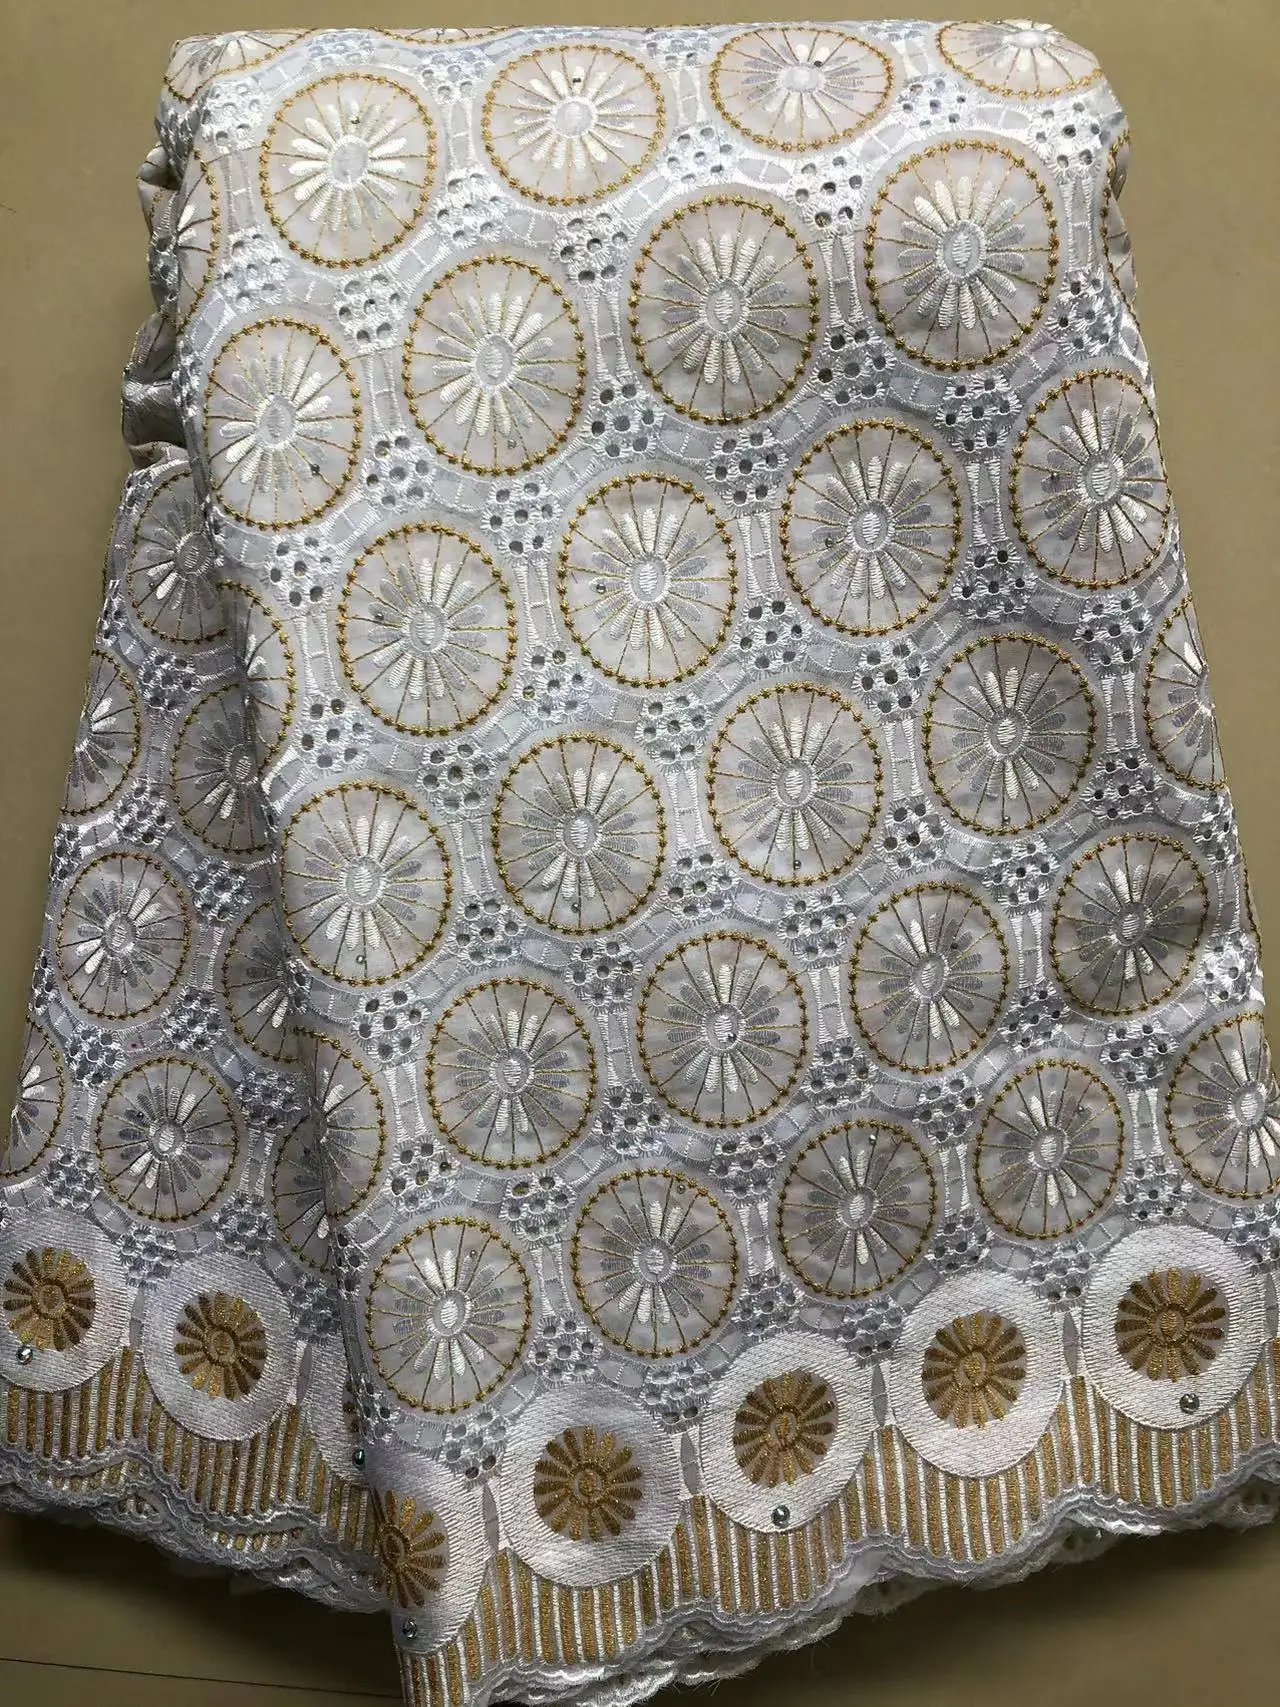 African Cotton Lace Fabric 2023 High Quality Swiss Voile Lace In Switzerland With Stones Nigerian Lace Fabrics For Wedding Dress blue hollow swiss voile lace in switzerland african lace fabric 2020 high quality lace embroidery nigerian cotton lace fabrics